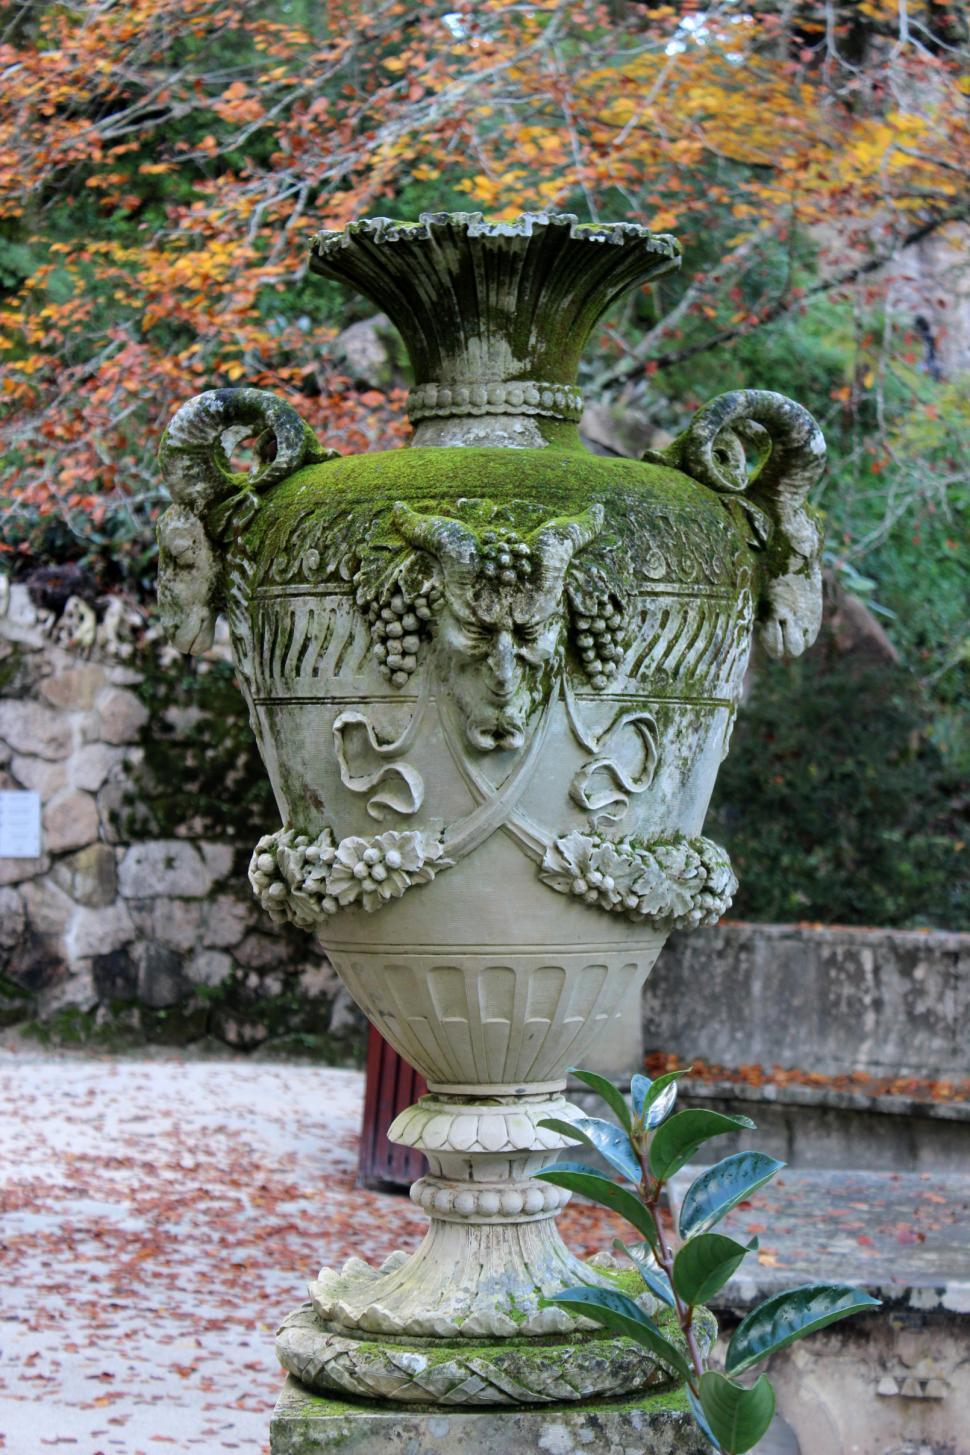 Free Image of Old Vase with Faun Face 